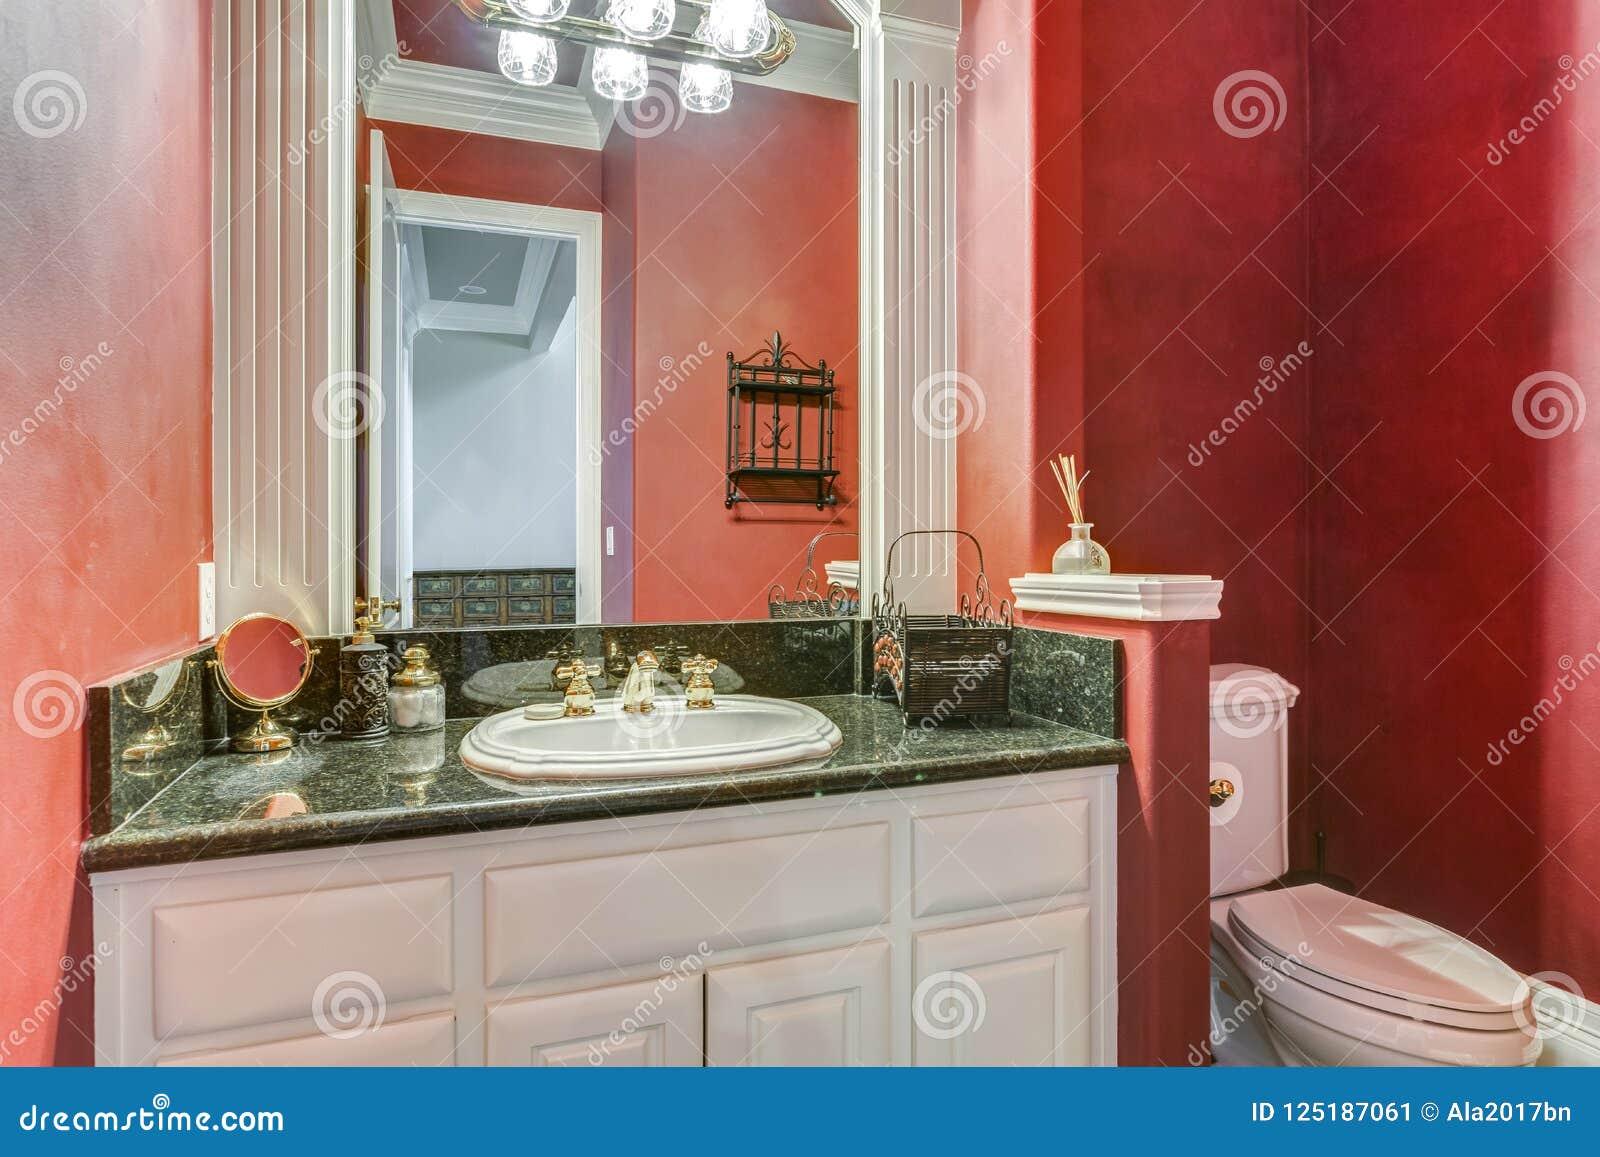 Red Bathroom Design In A Luxurious Country House Stock Image Image Of Style Home 125187061